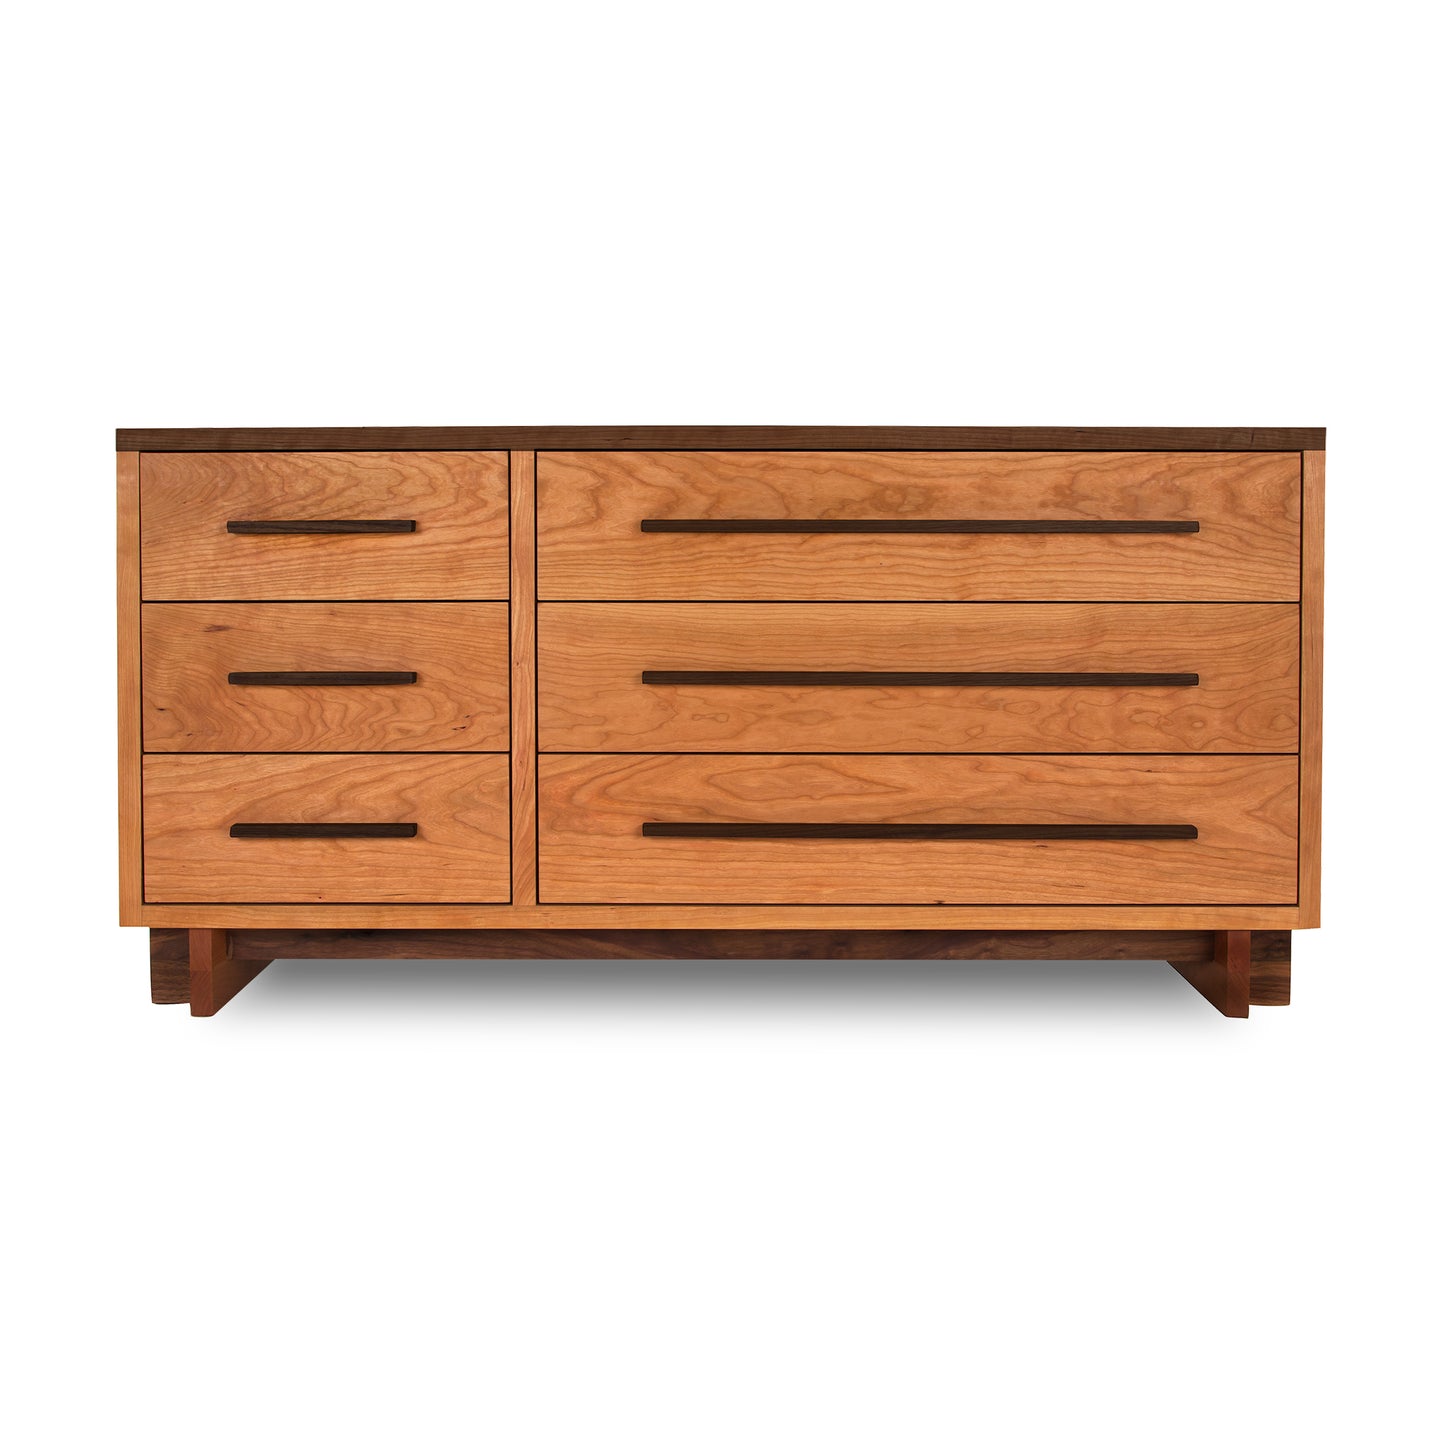 A Vermont Furniture Designs Modern American 6-Drawer Dresser #2 made of solid wood with four drawers.